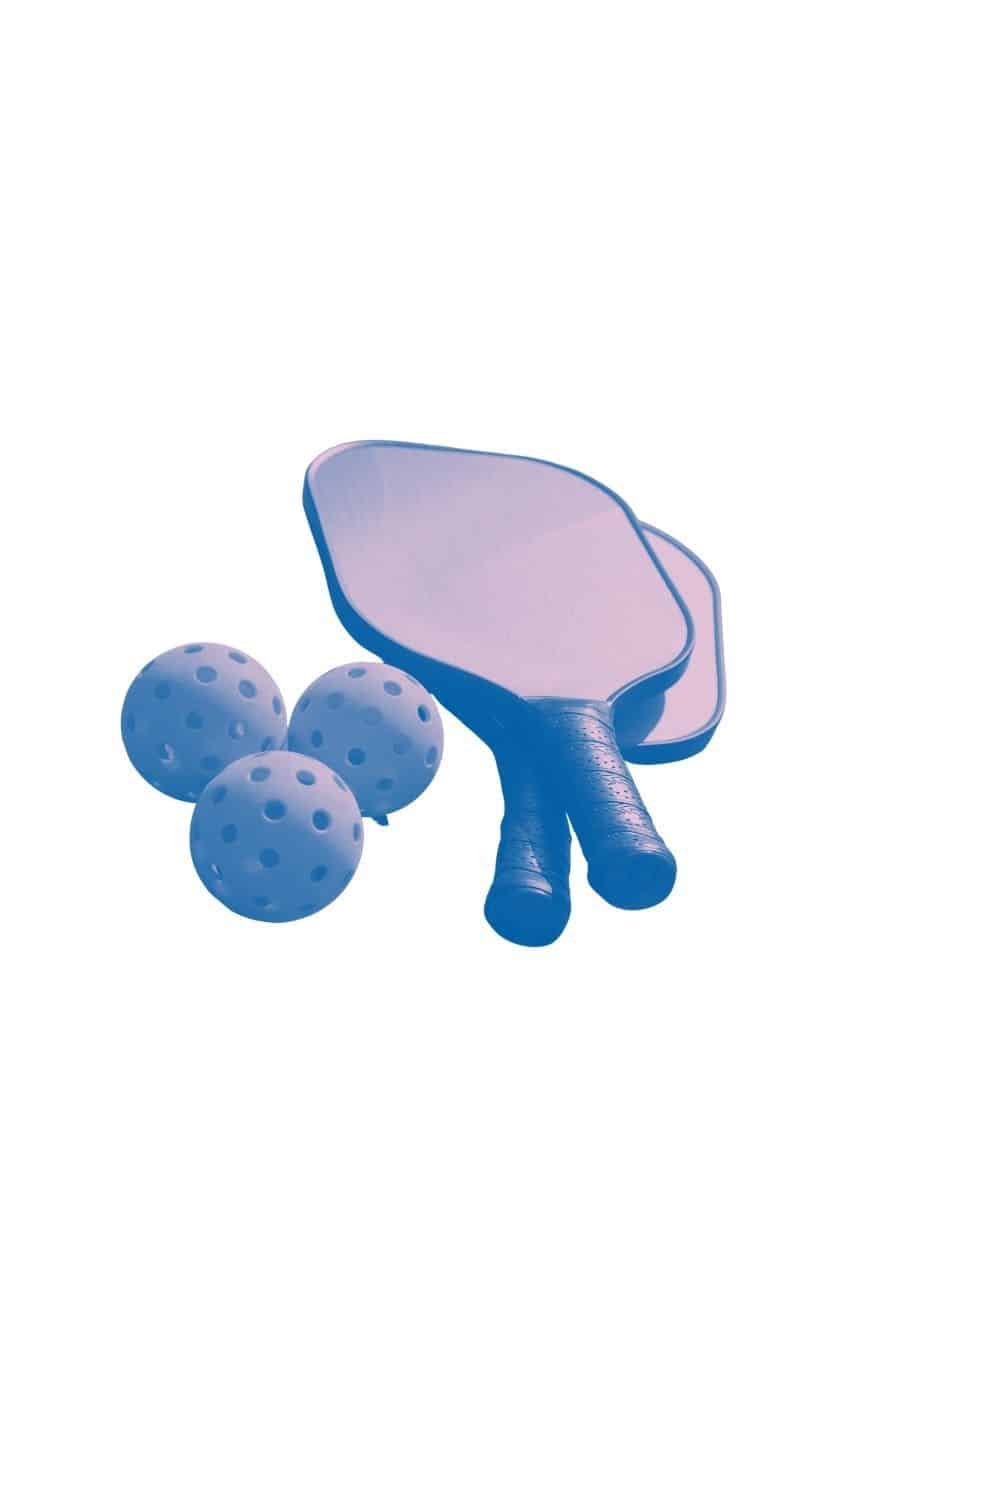 pickleball paddle for beginners a set of 2